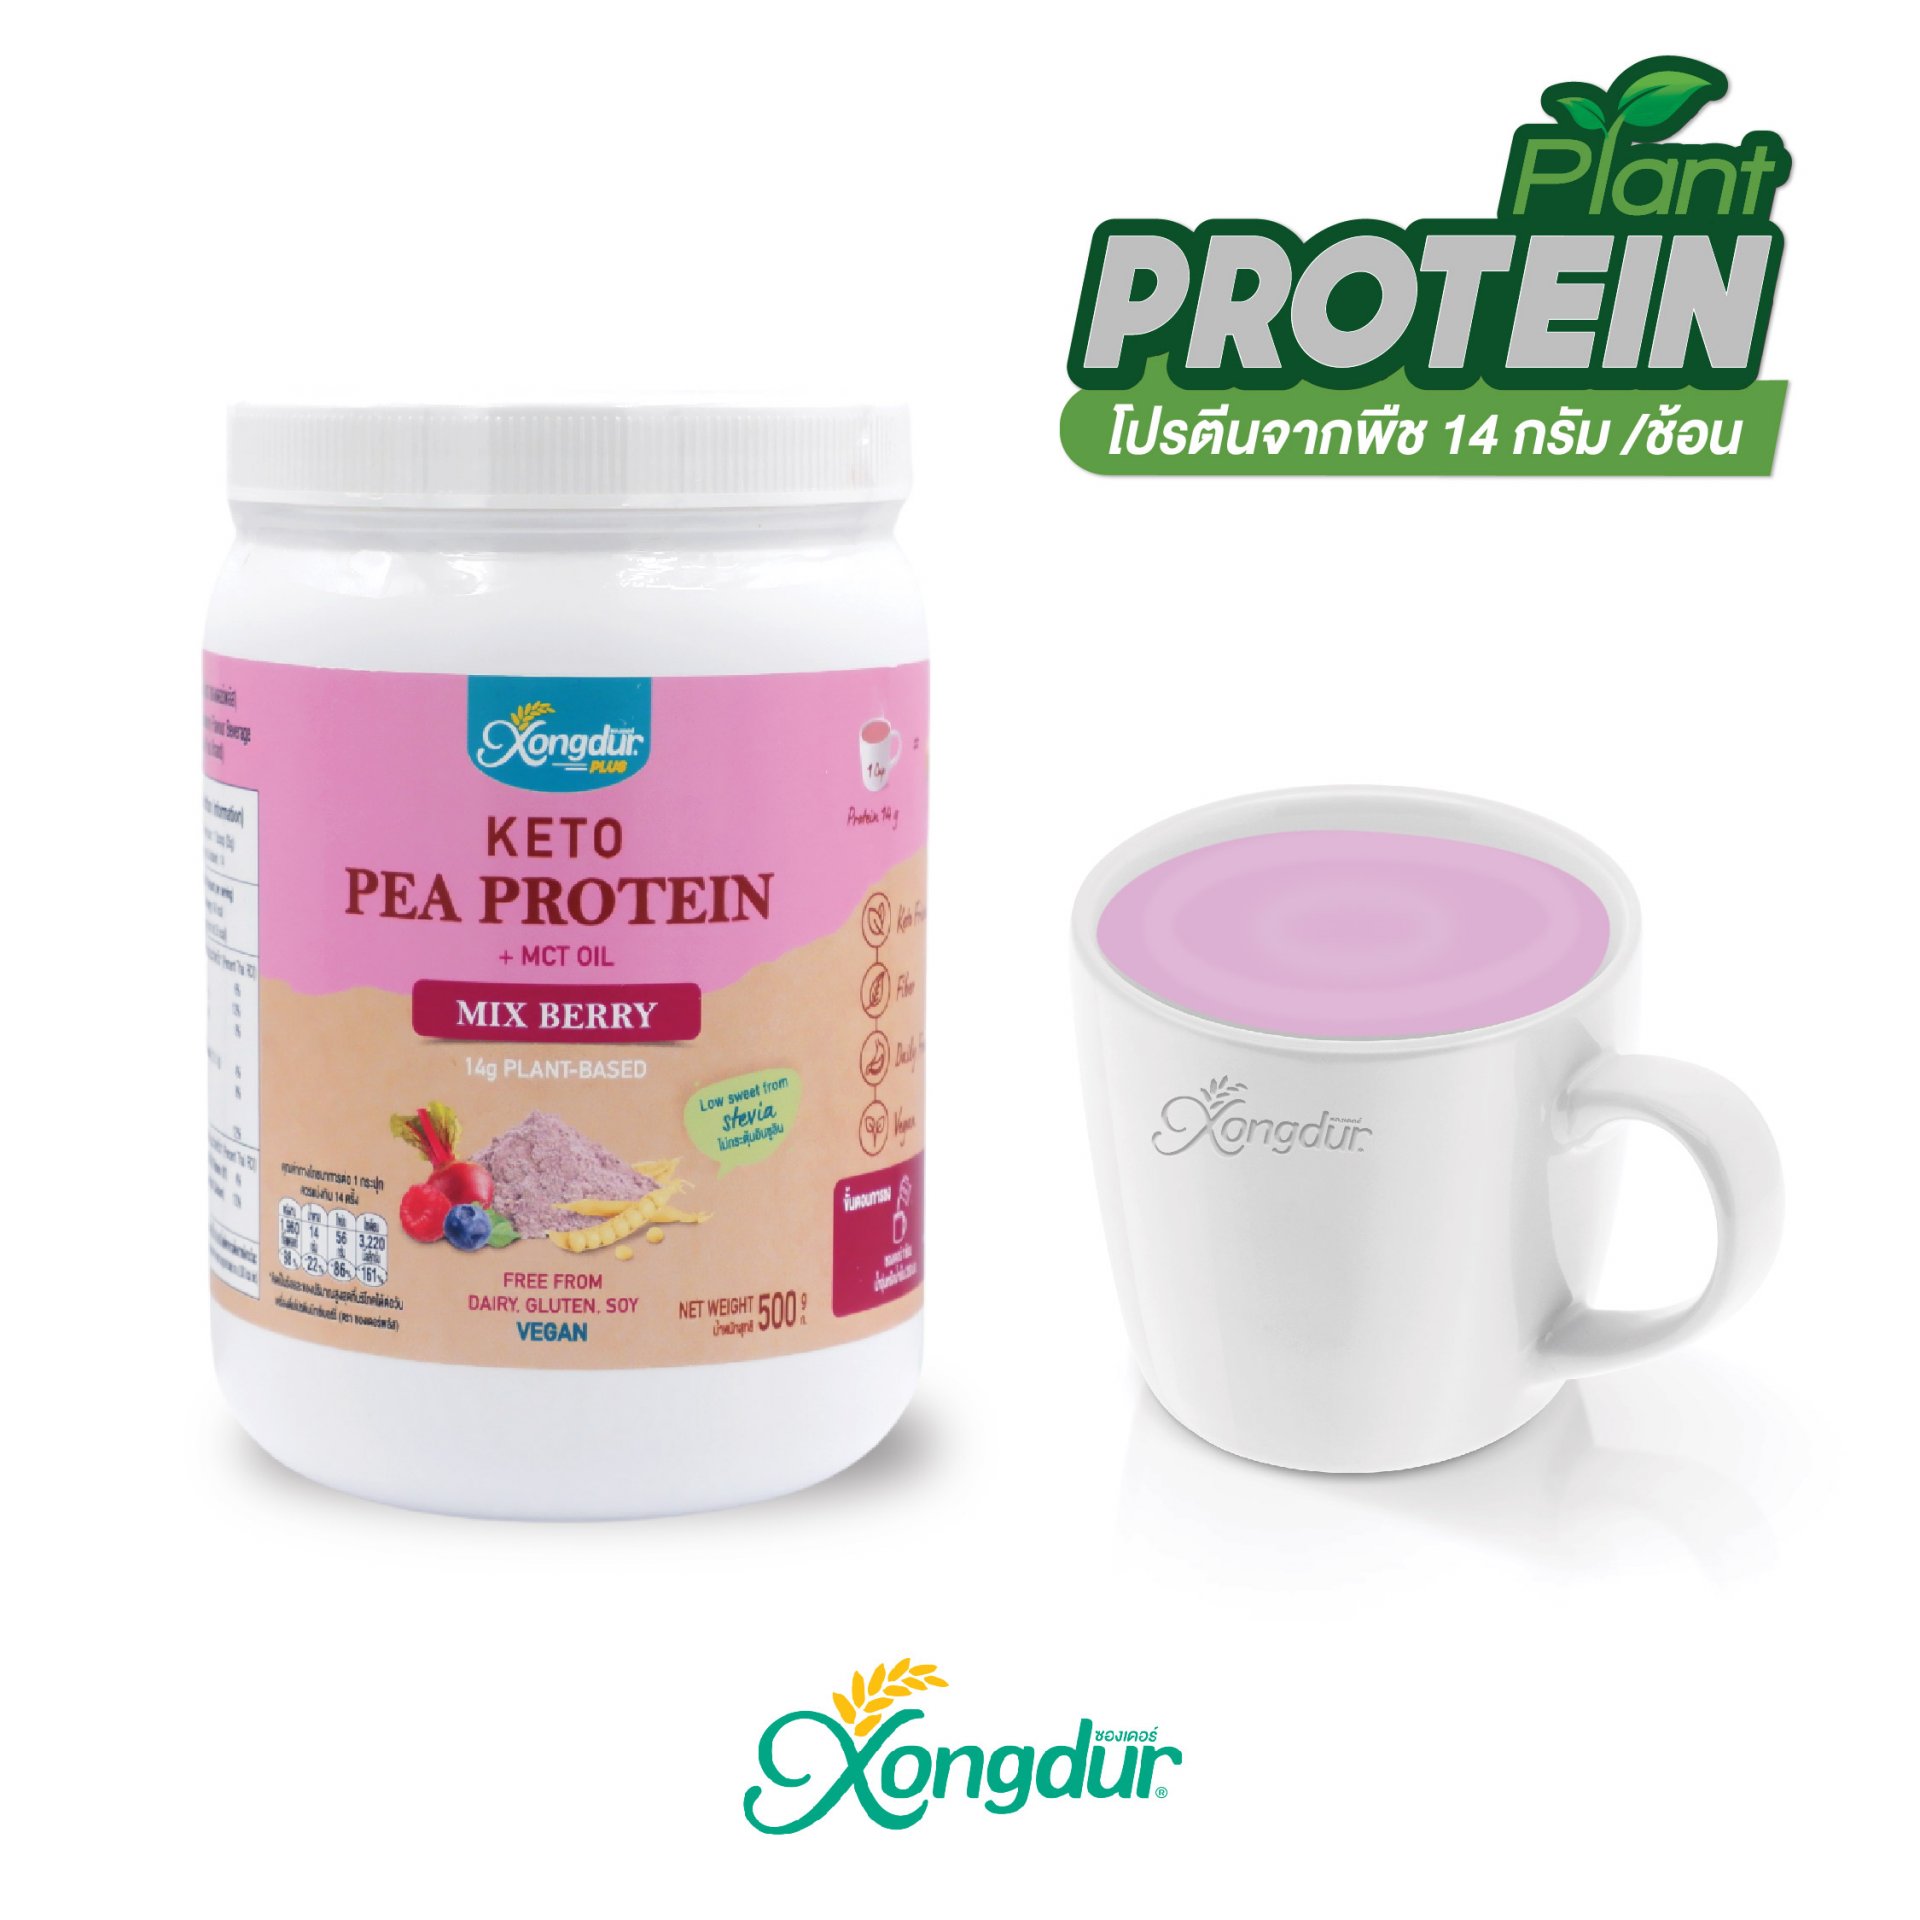 NEW! Instant Pea Protein Mix Berry Flavour Beverage Powder 500g.